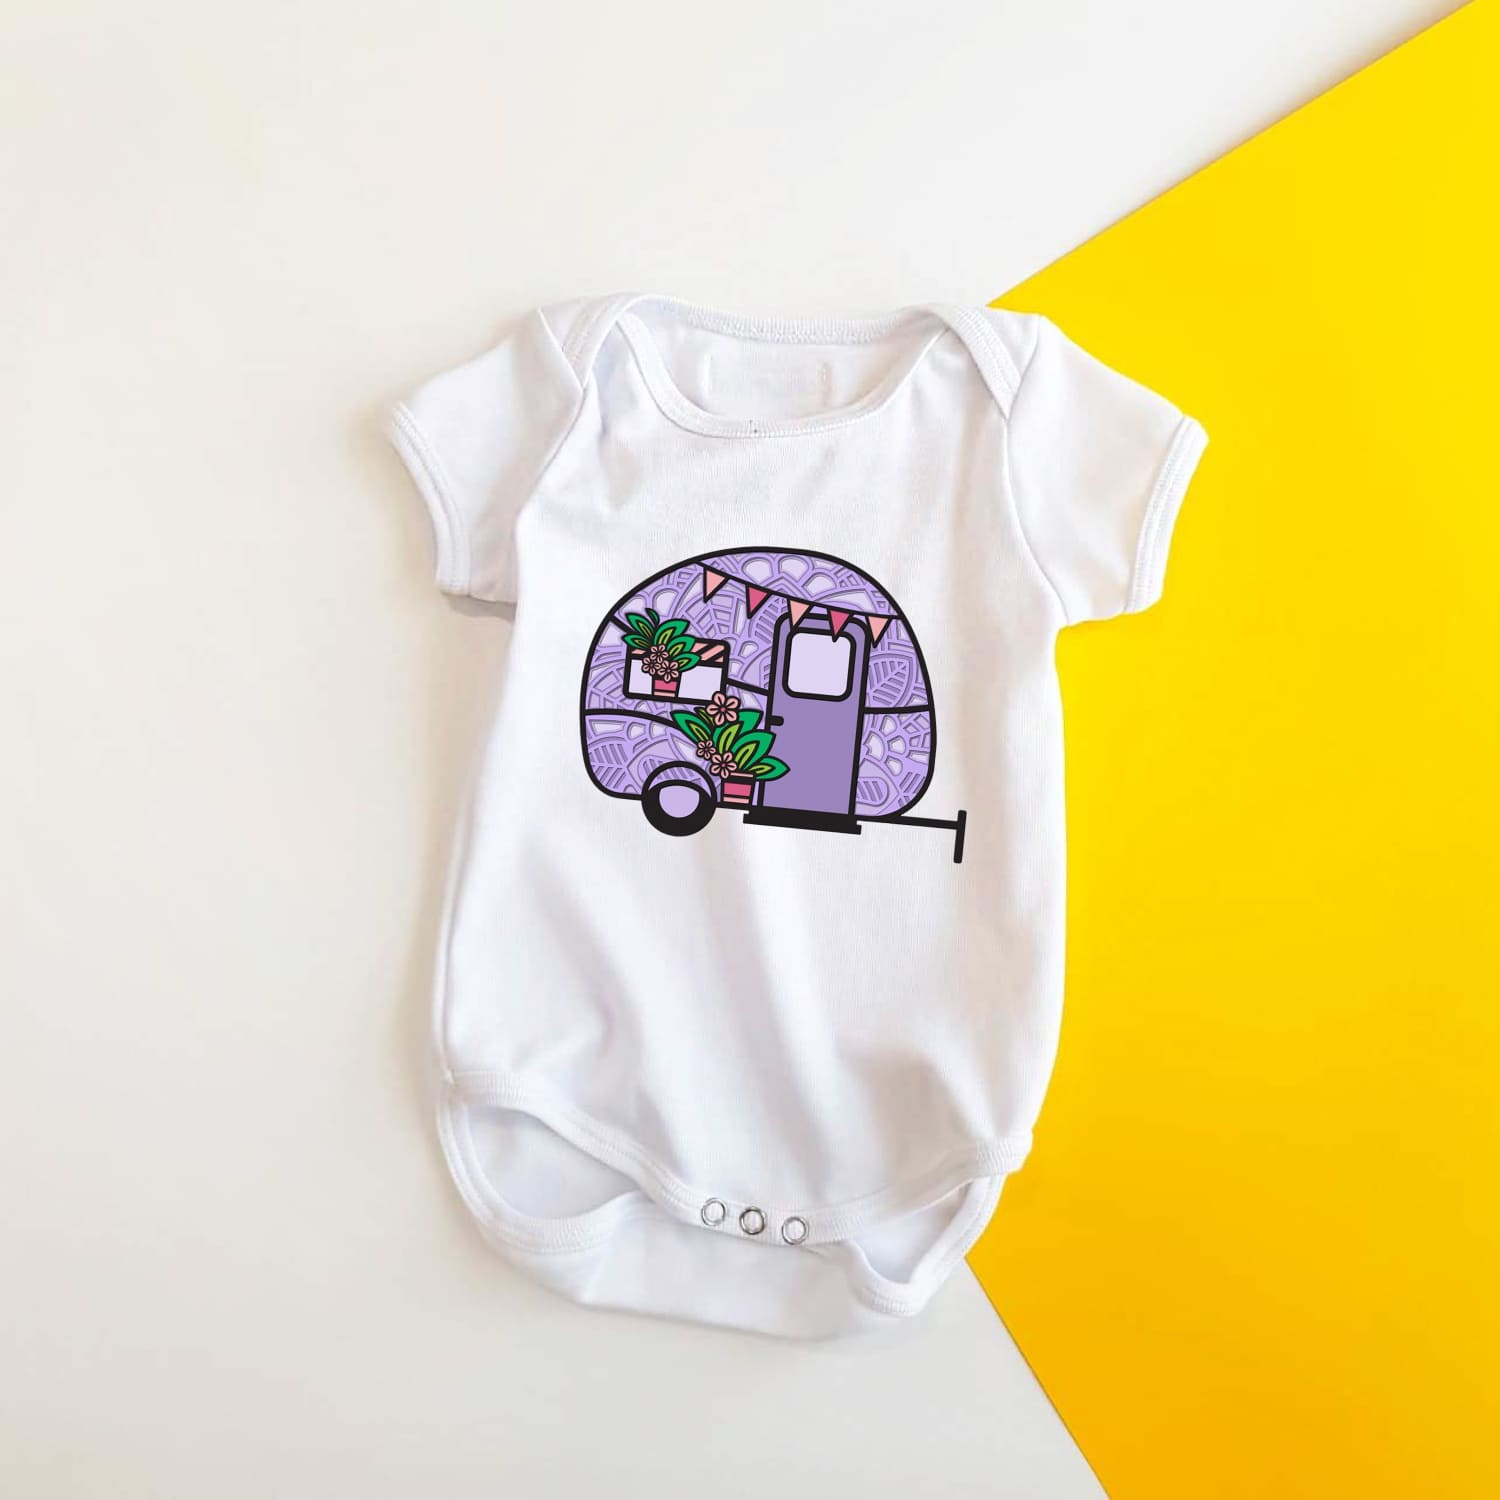 Perfect for baby clothes.